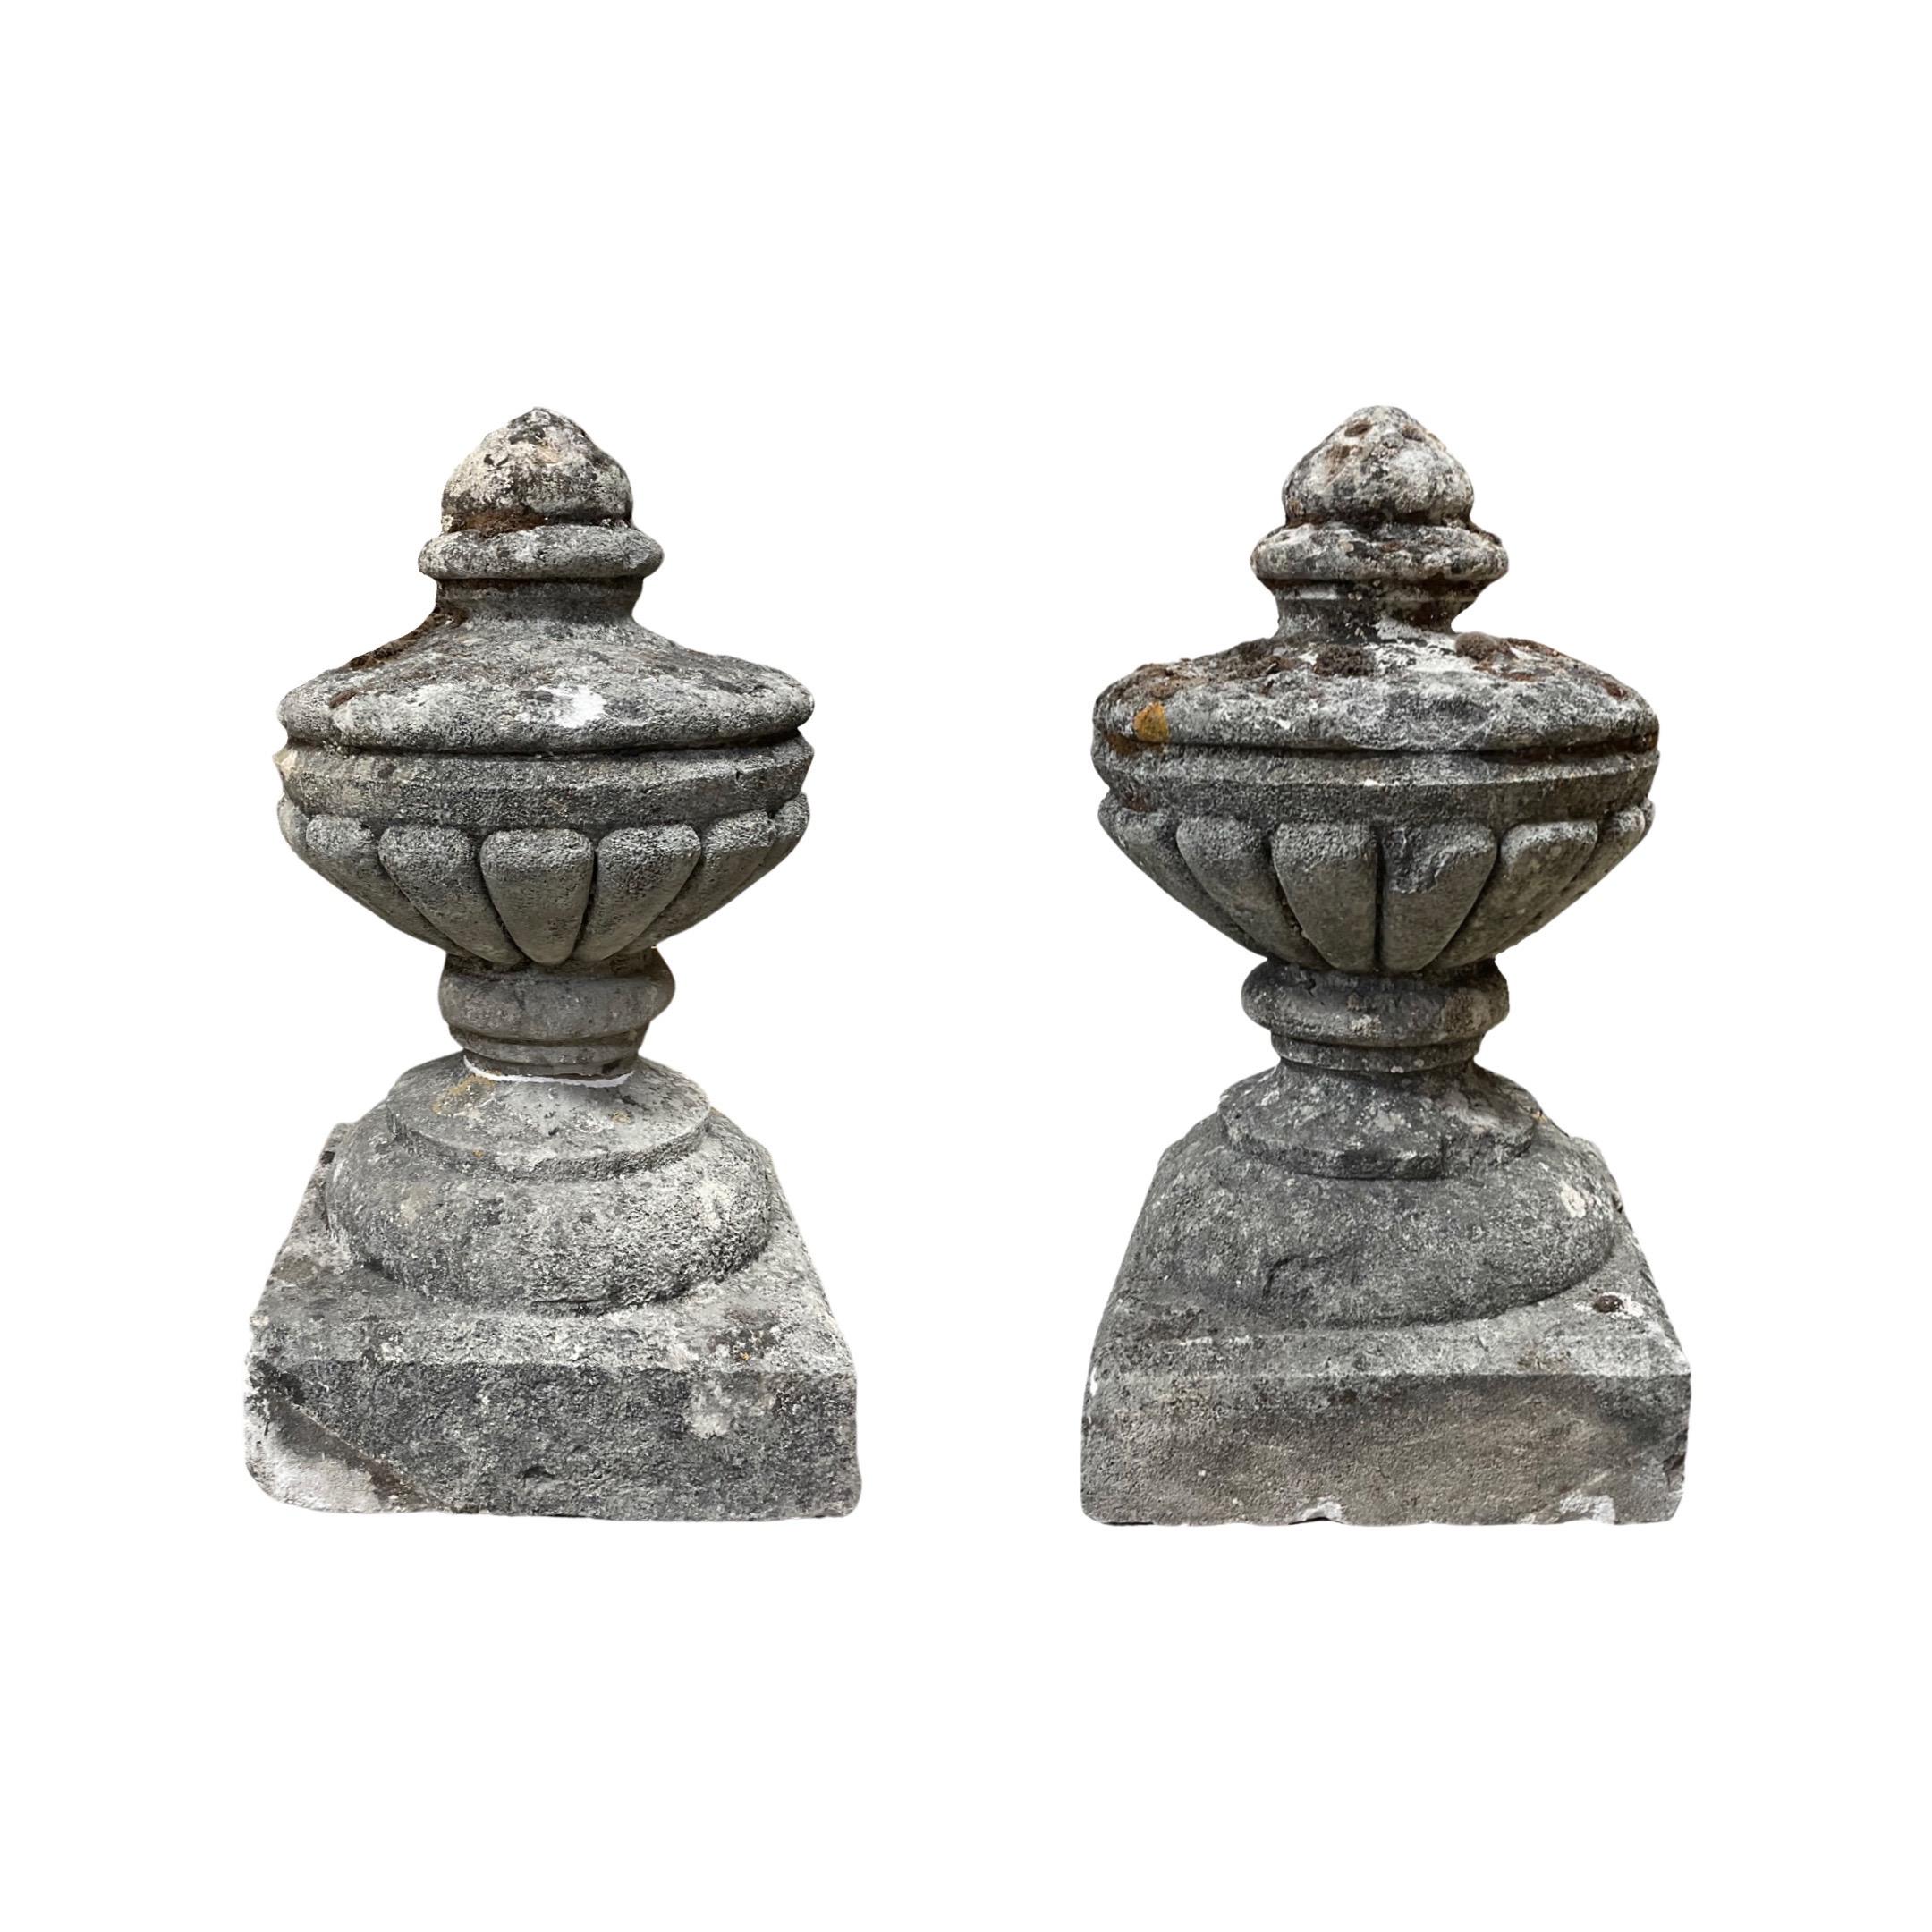 This pair of French Limestone Finals from circa 1750 is a beautiful addition to any home. Crafted in France out of limestone, these finials offer a classic, timeless design. Each piece is carefully sculpted and tested to ensure quality. Add a touch